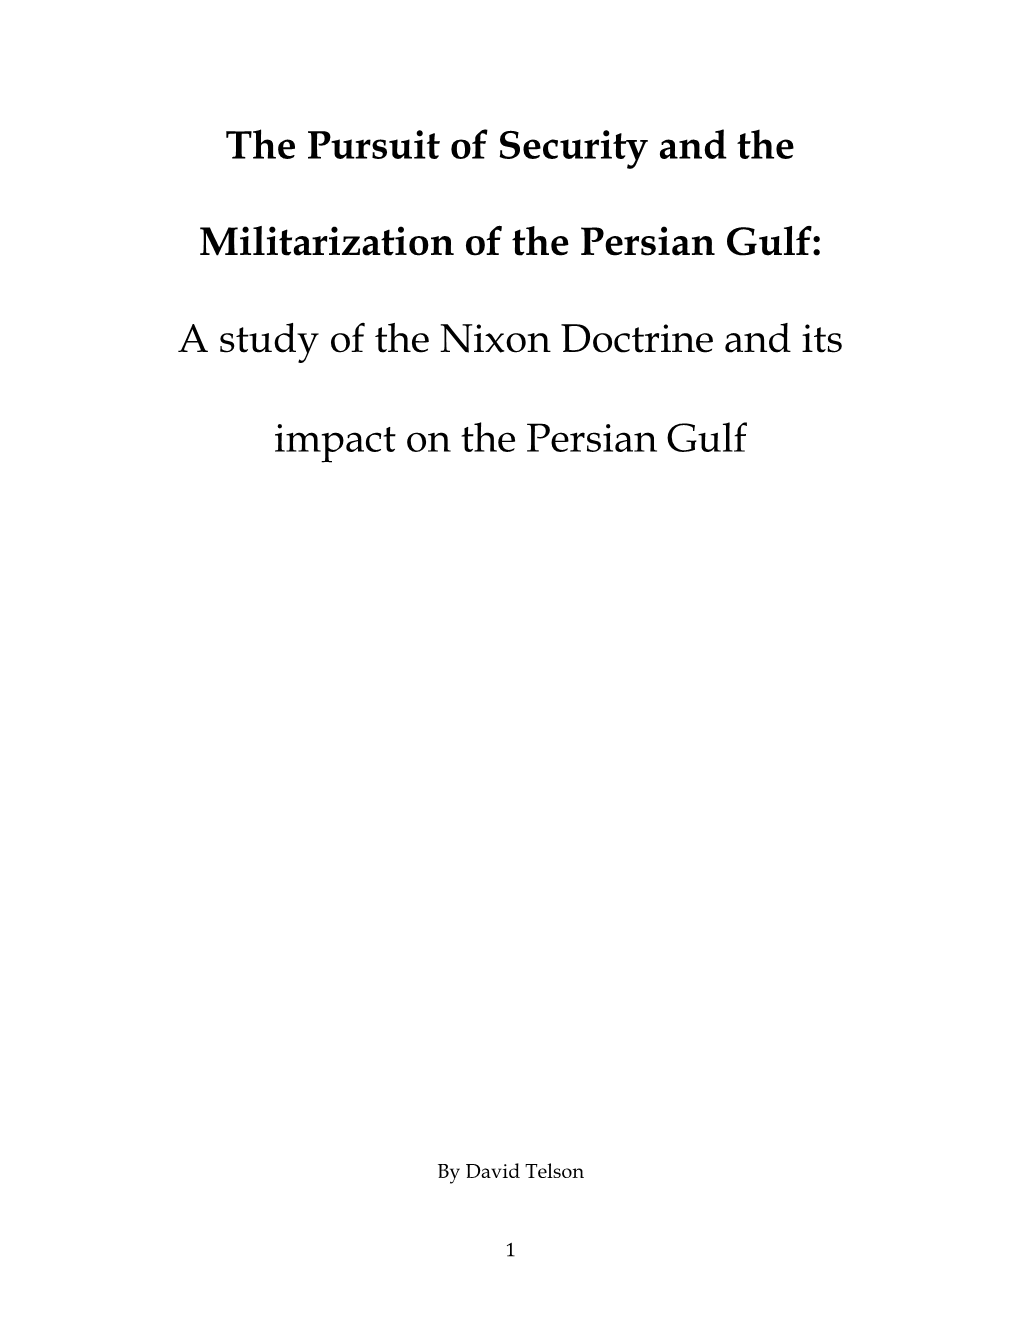 The Pursuit of Security and the Militarization of the Persian Gulf: A